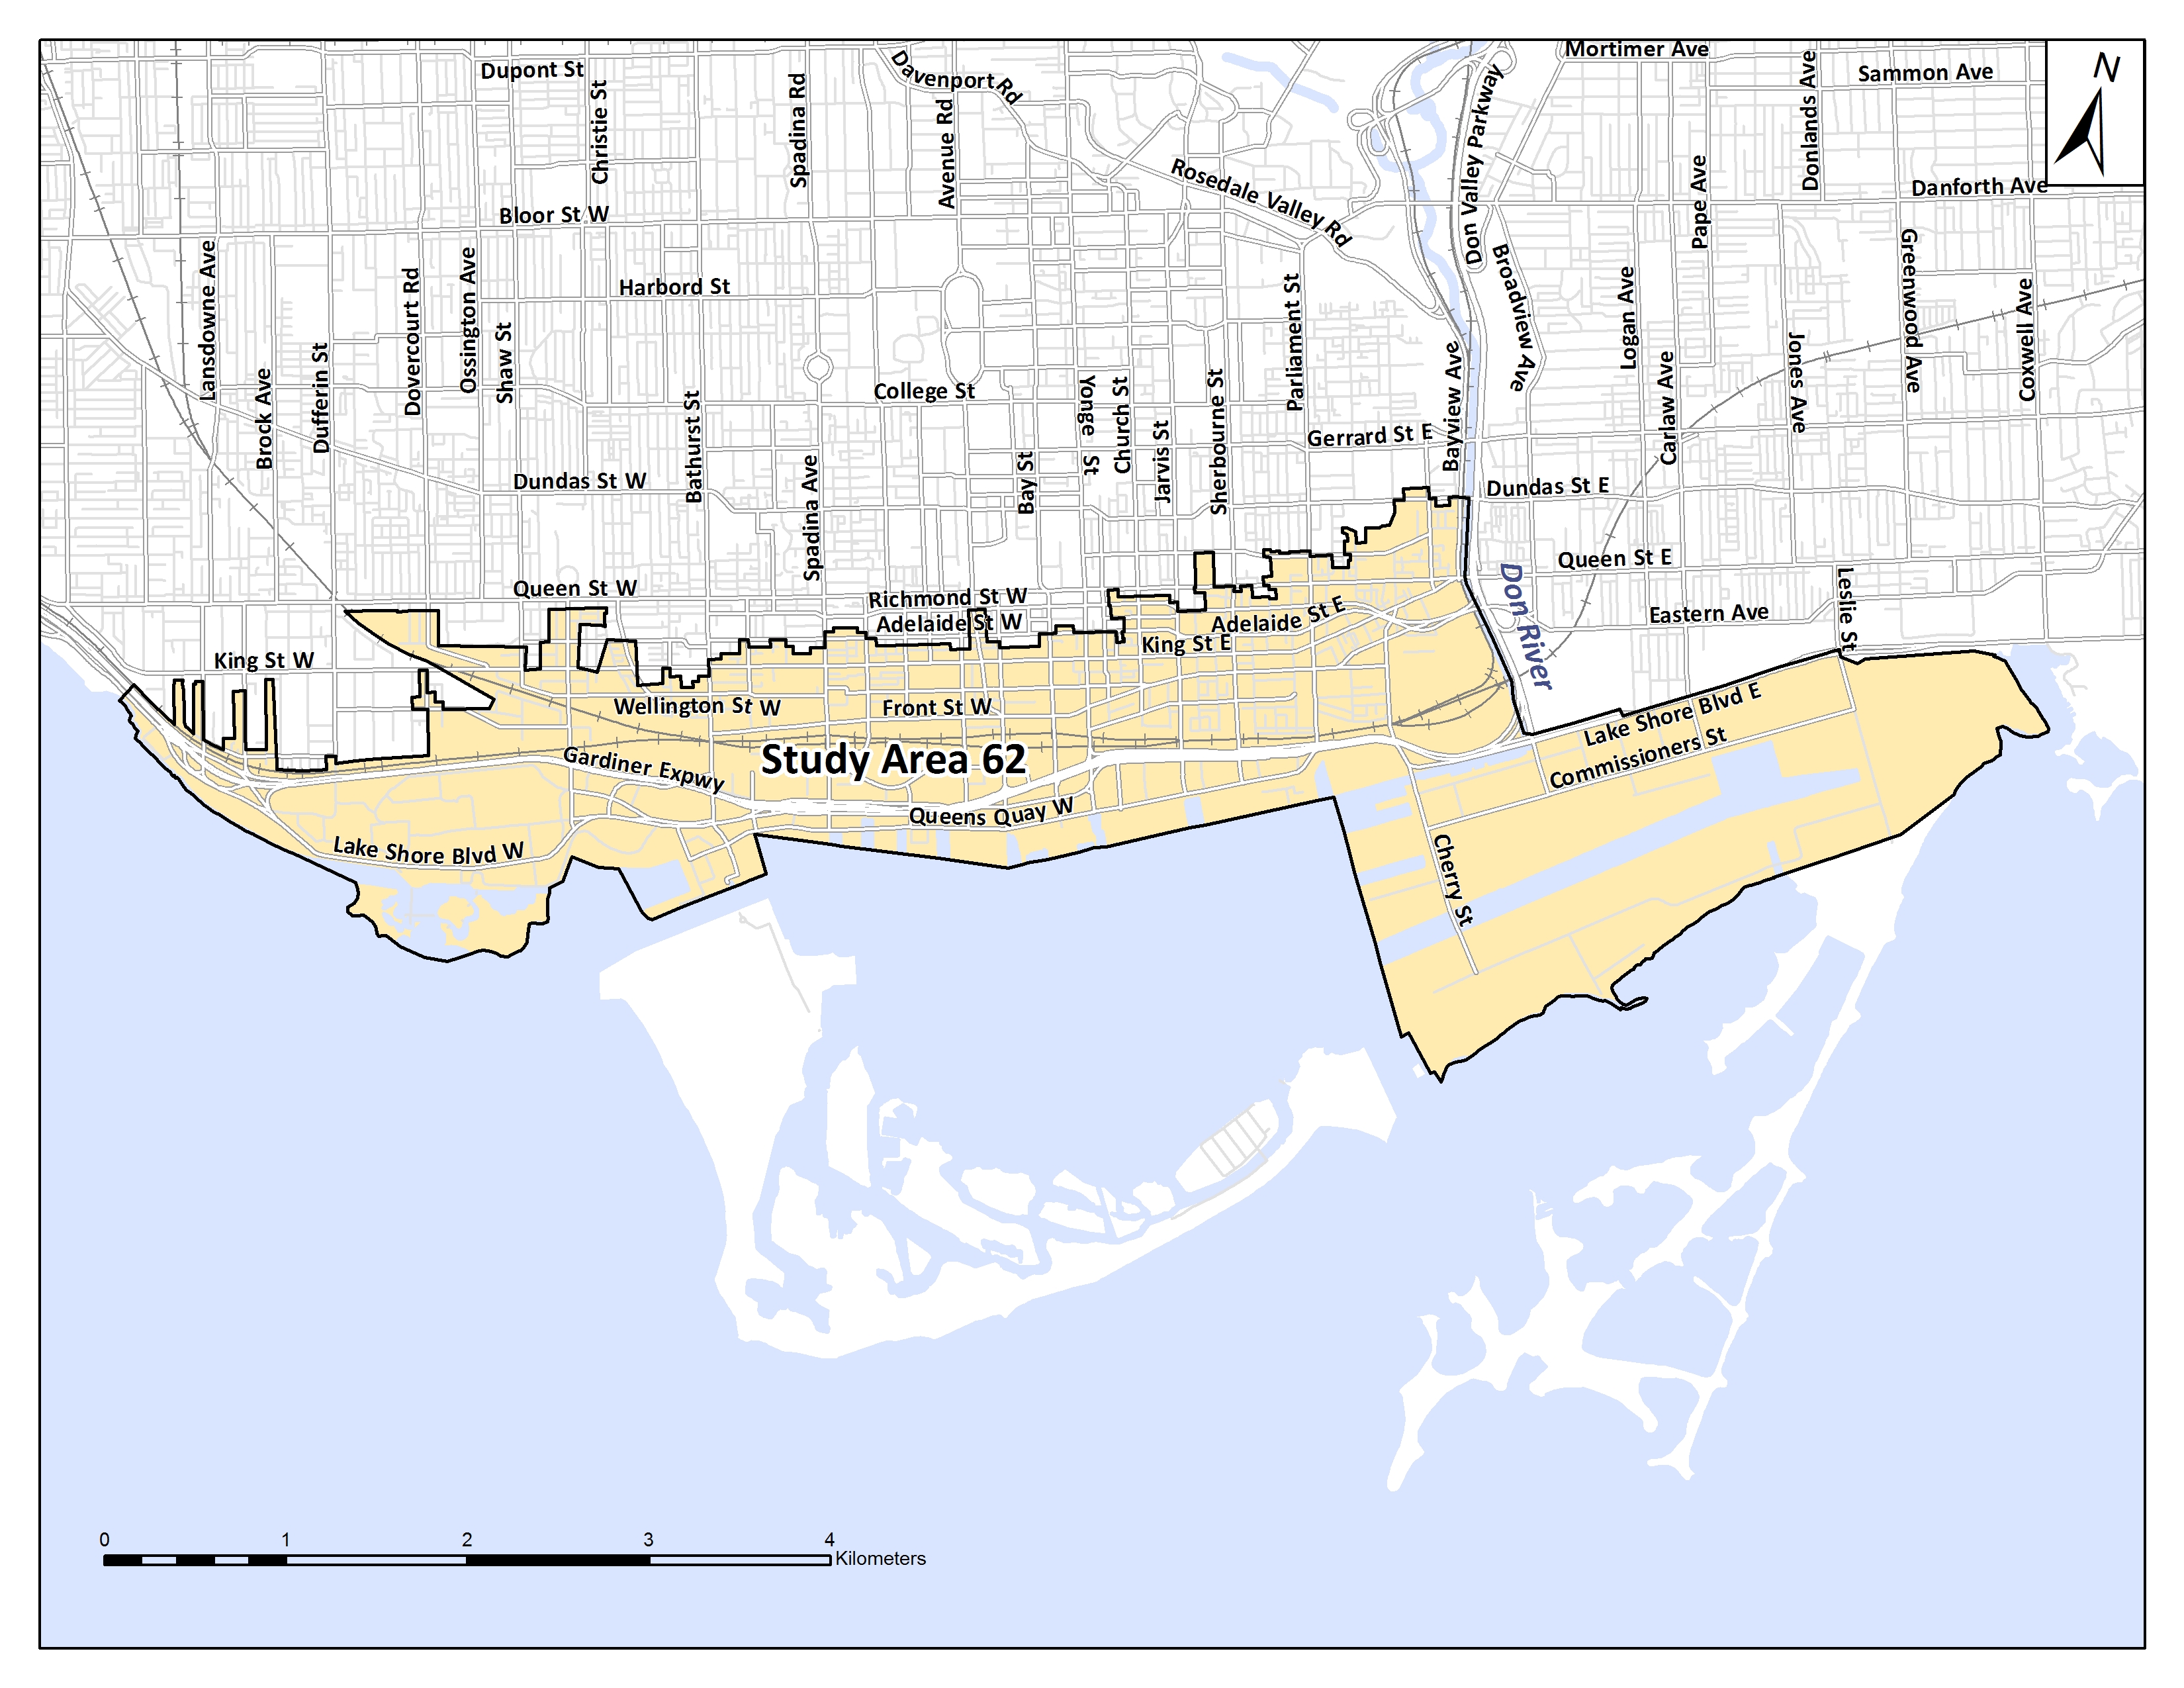 Map of Basement Flooding Study Area 62. If you require assistance reading this map, please contact the Public Consultation Unit at 416-392-8210.